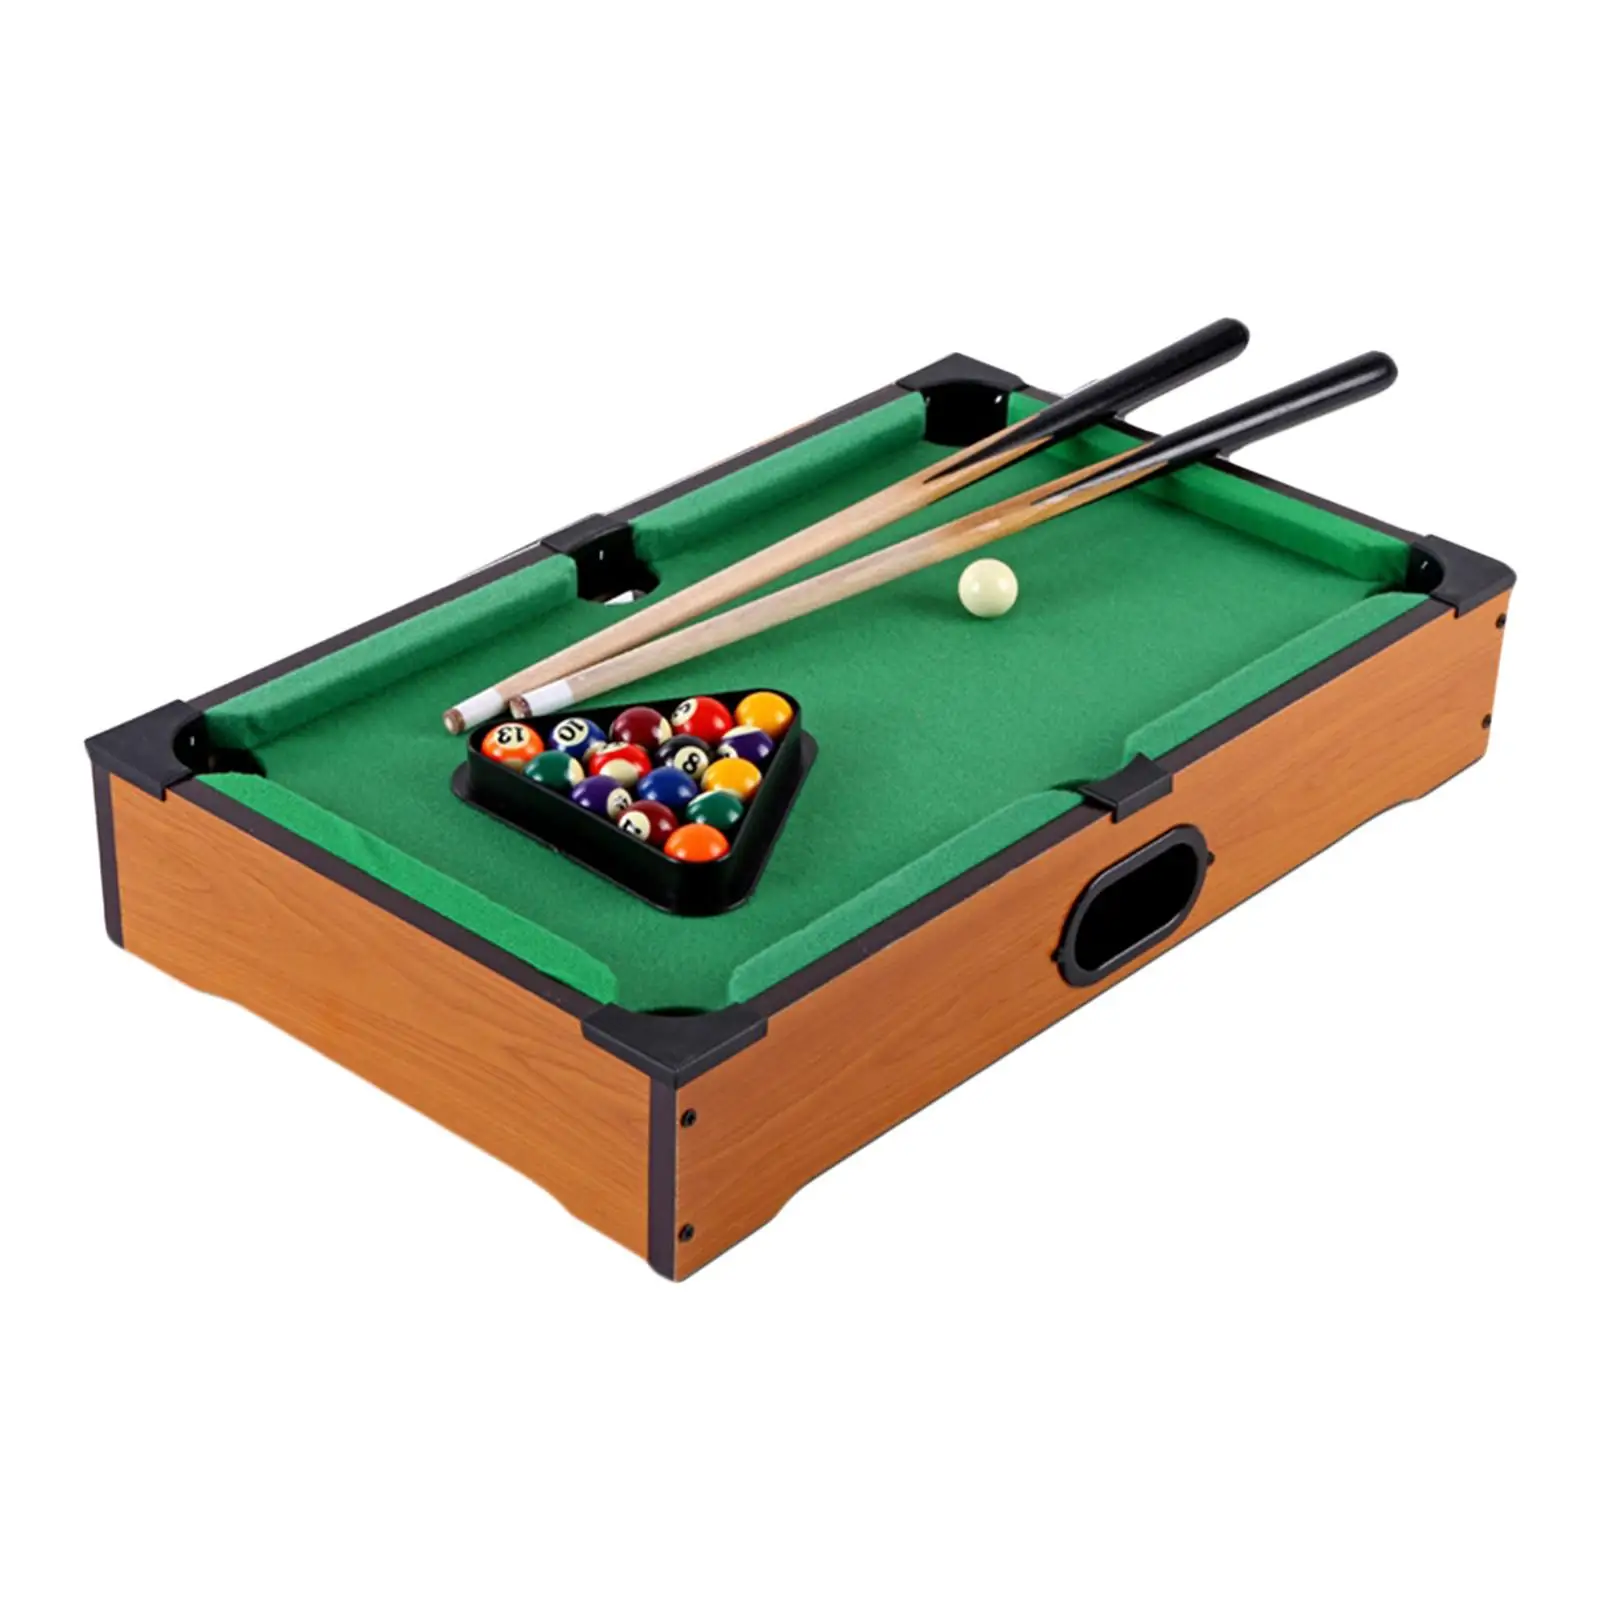 Mini Pool Table Game Portable Wooden Mini Billiards Tabletop Billiards Game Small Billiards Table Great Gift for Boys and Girls